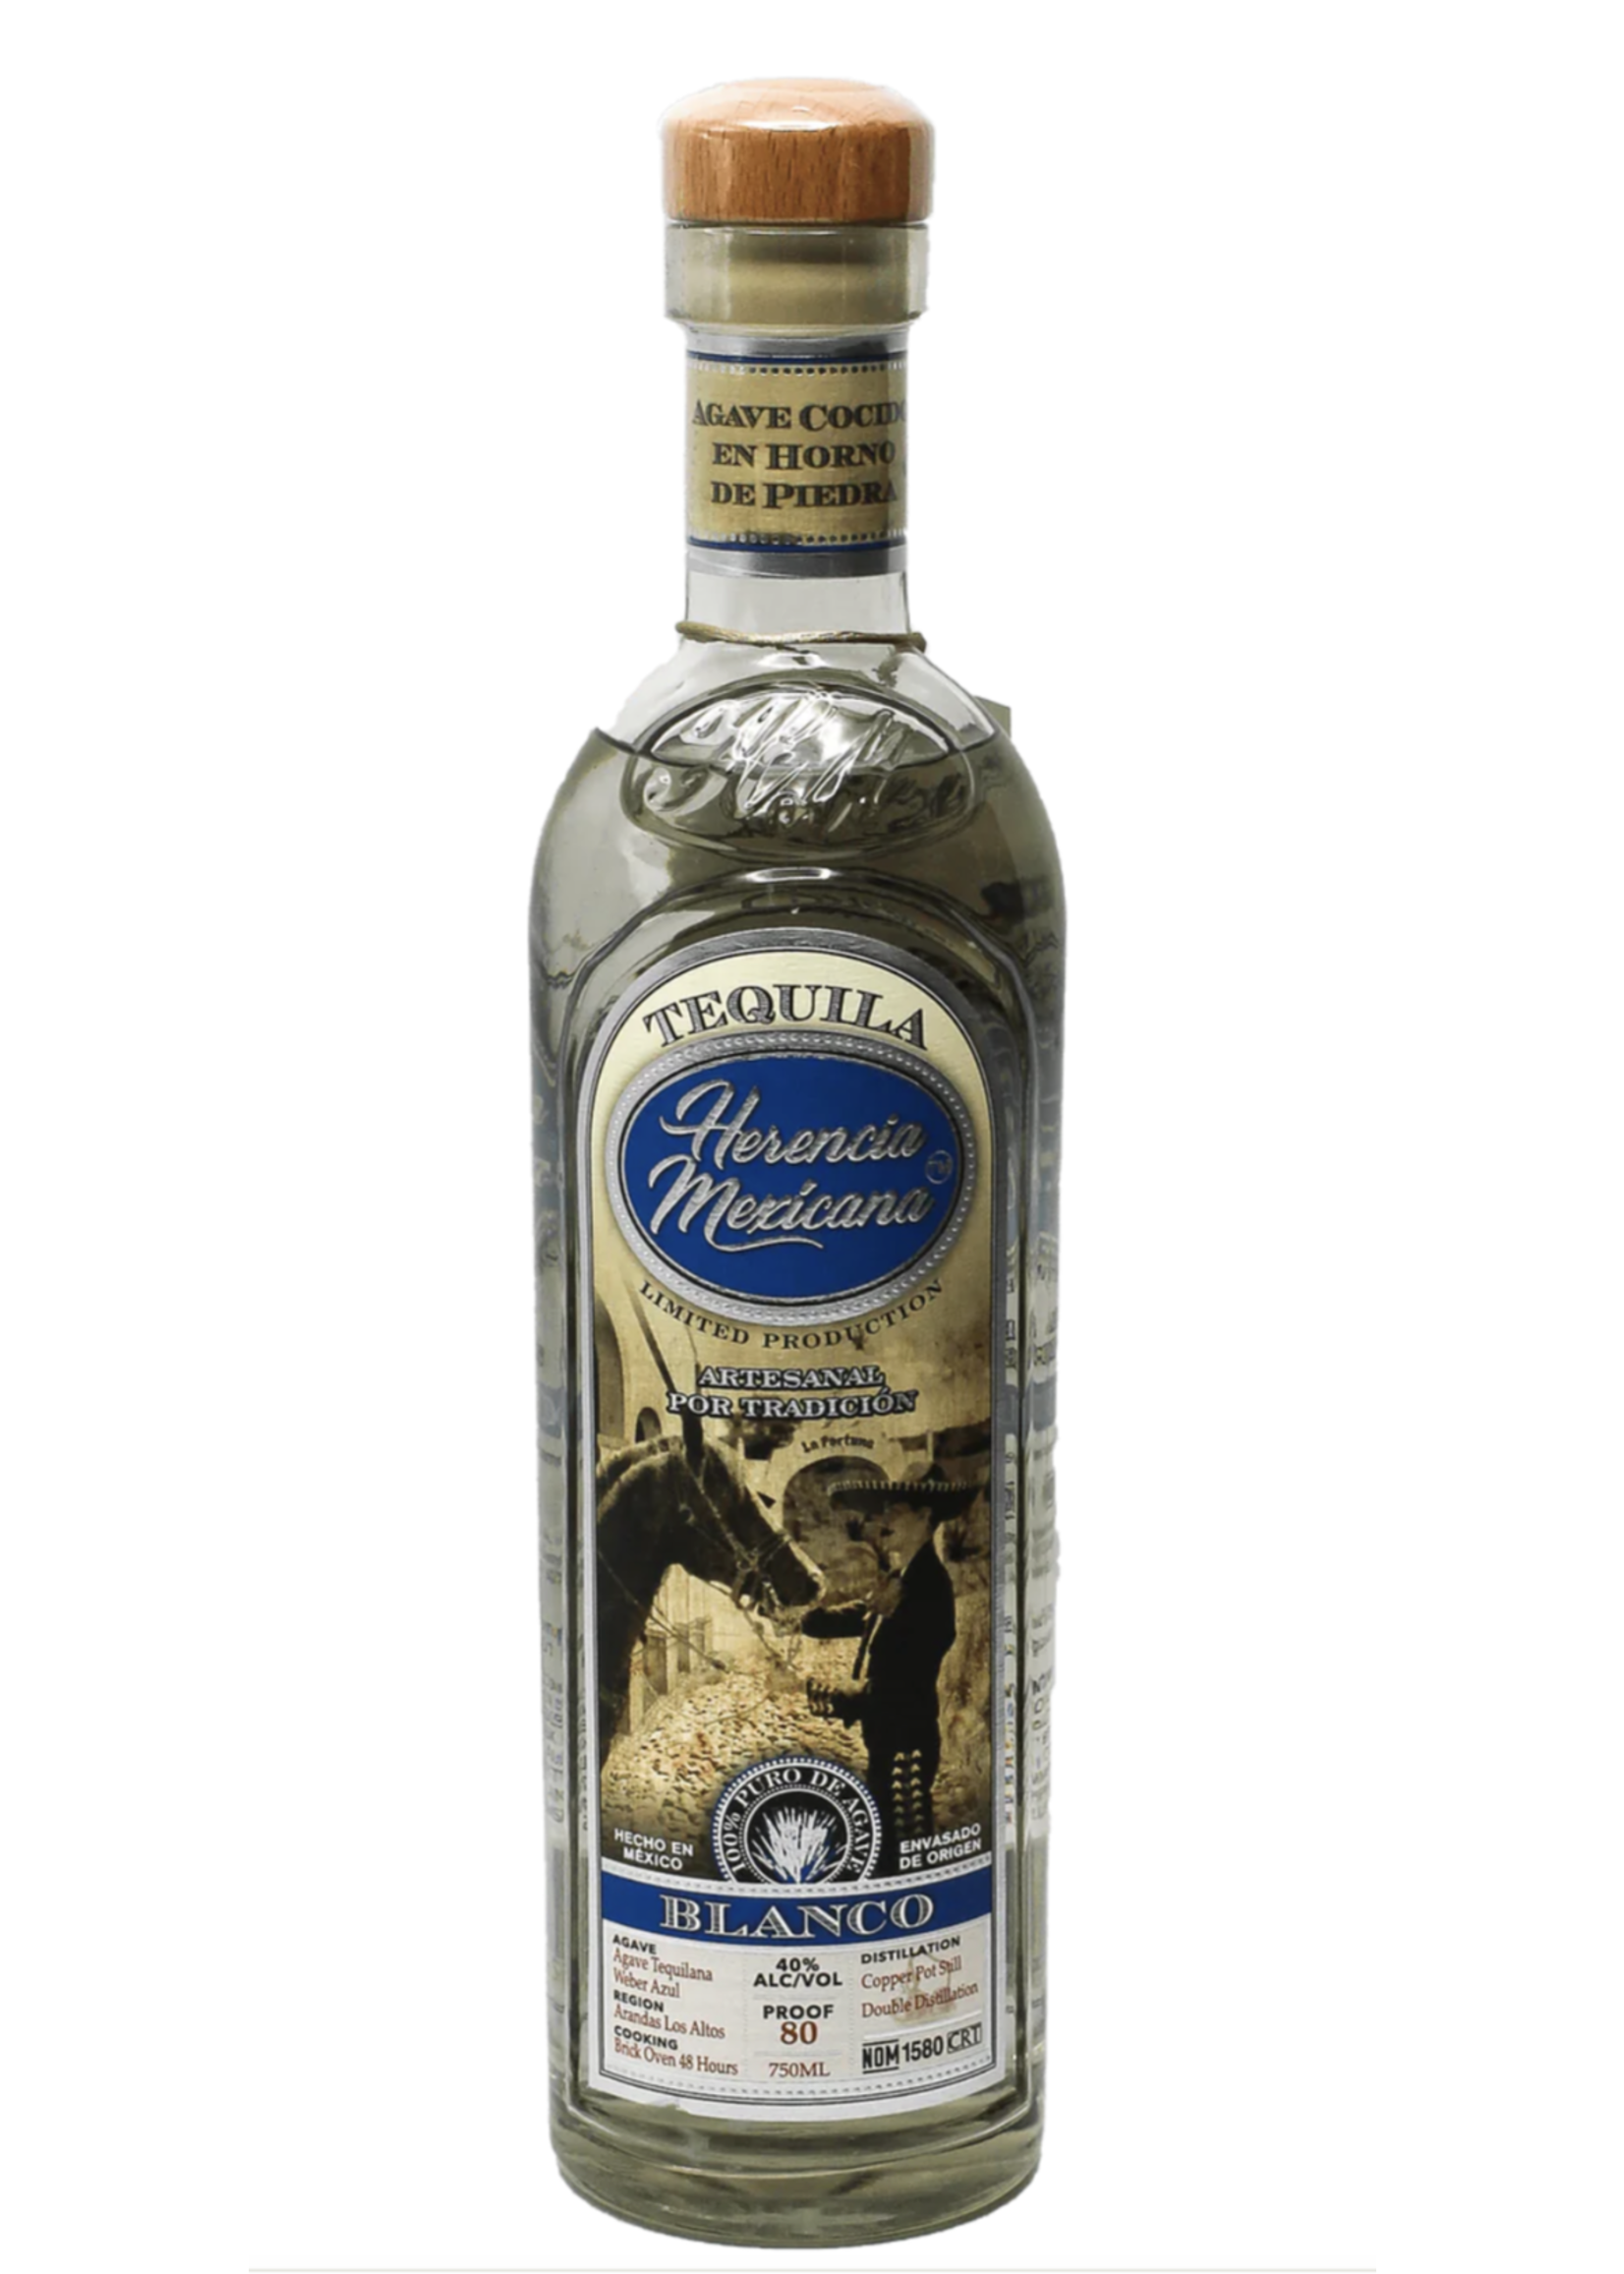 Herencia Mexicana Herencia Mexicana / Blanco Tequila 40% abv / 750mL